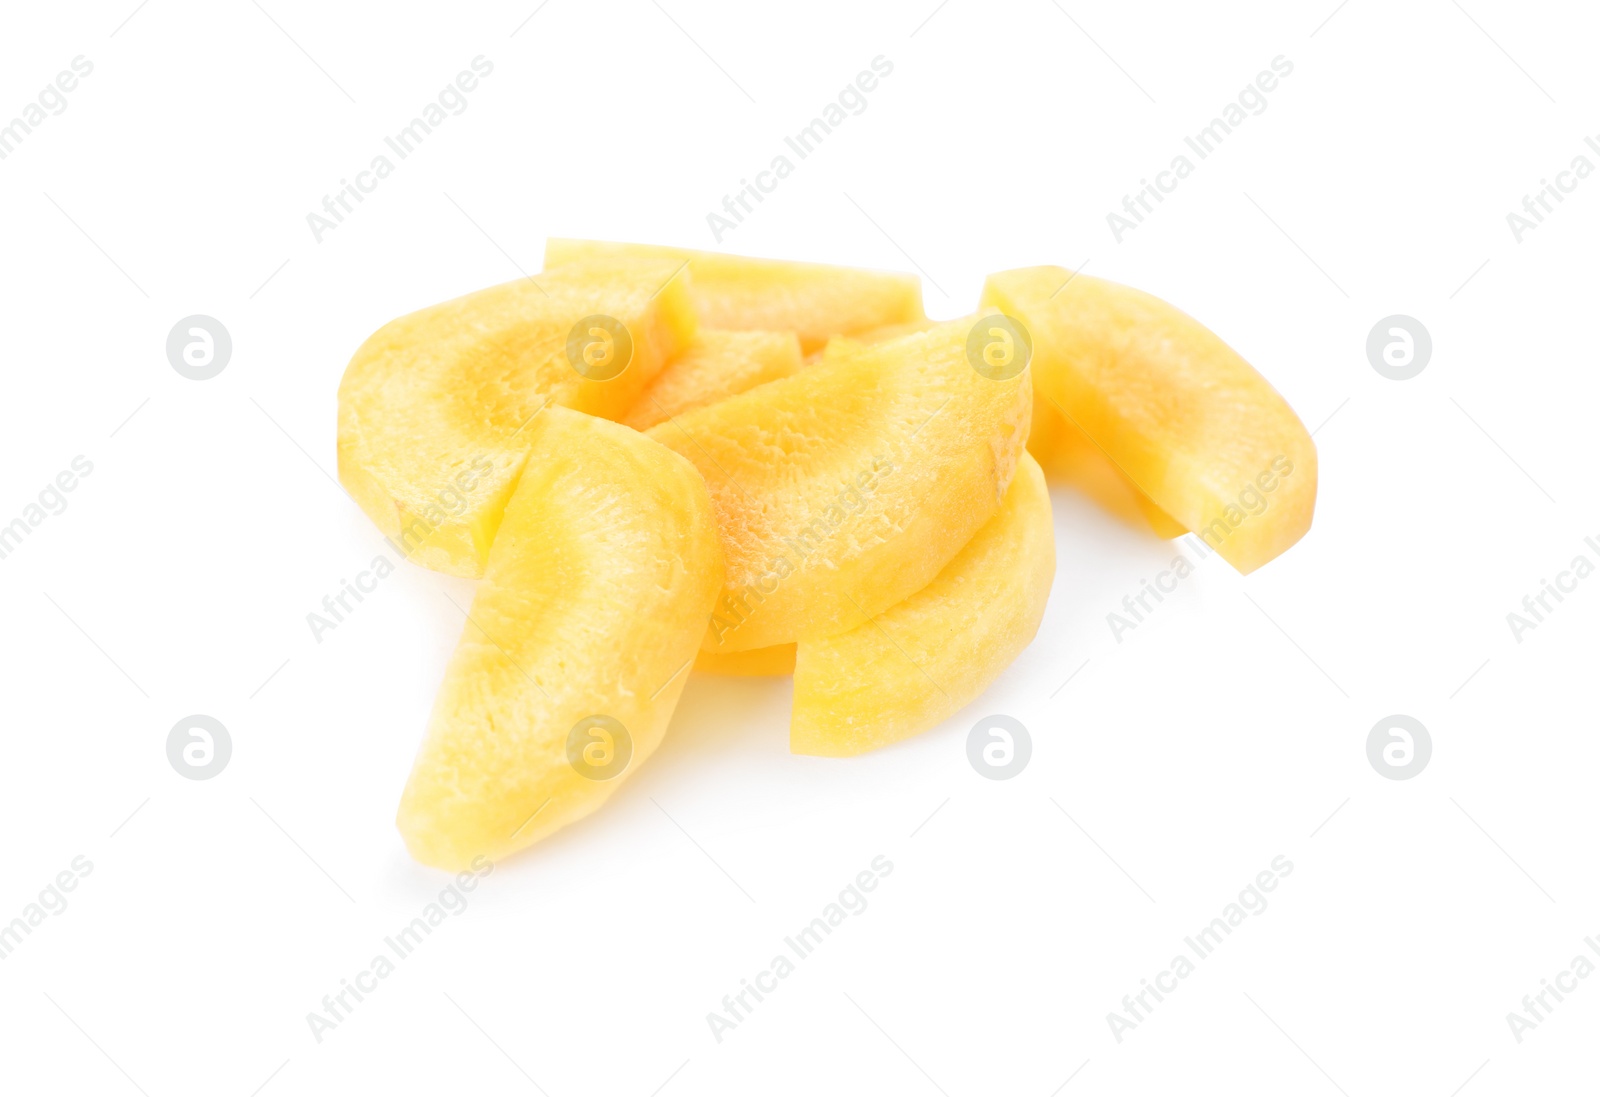 Photo of Slices of raw yellow carrot isolated on white